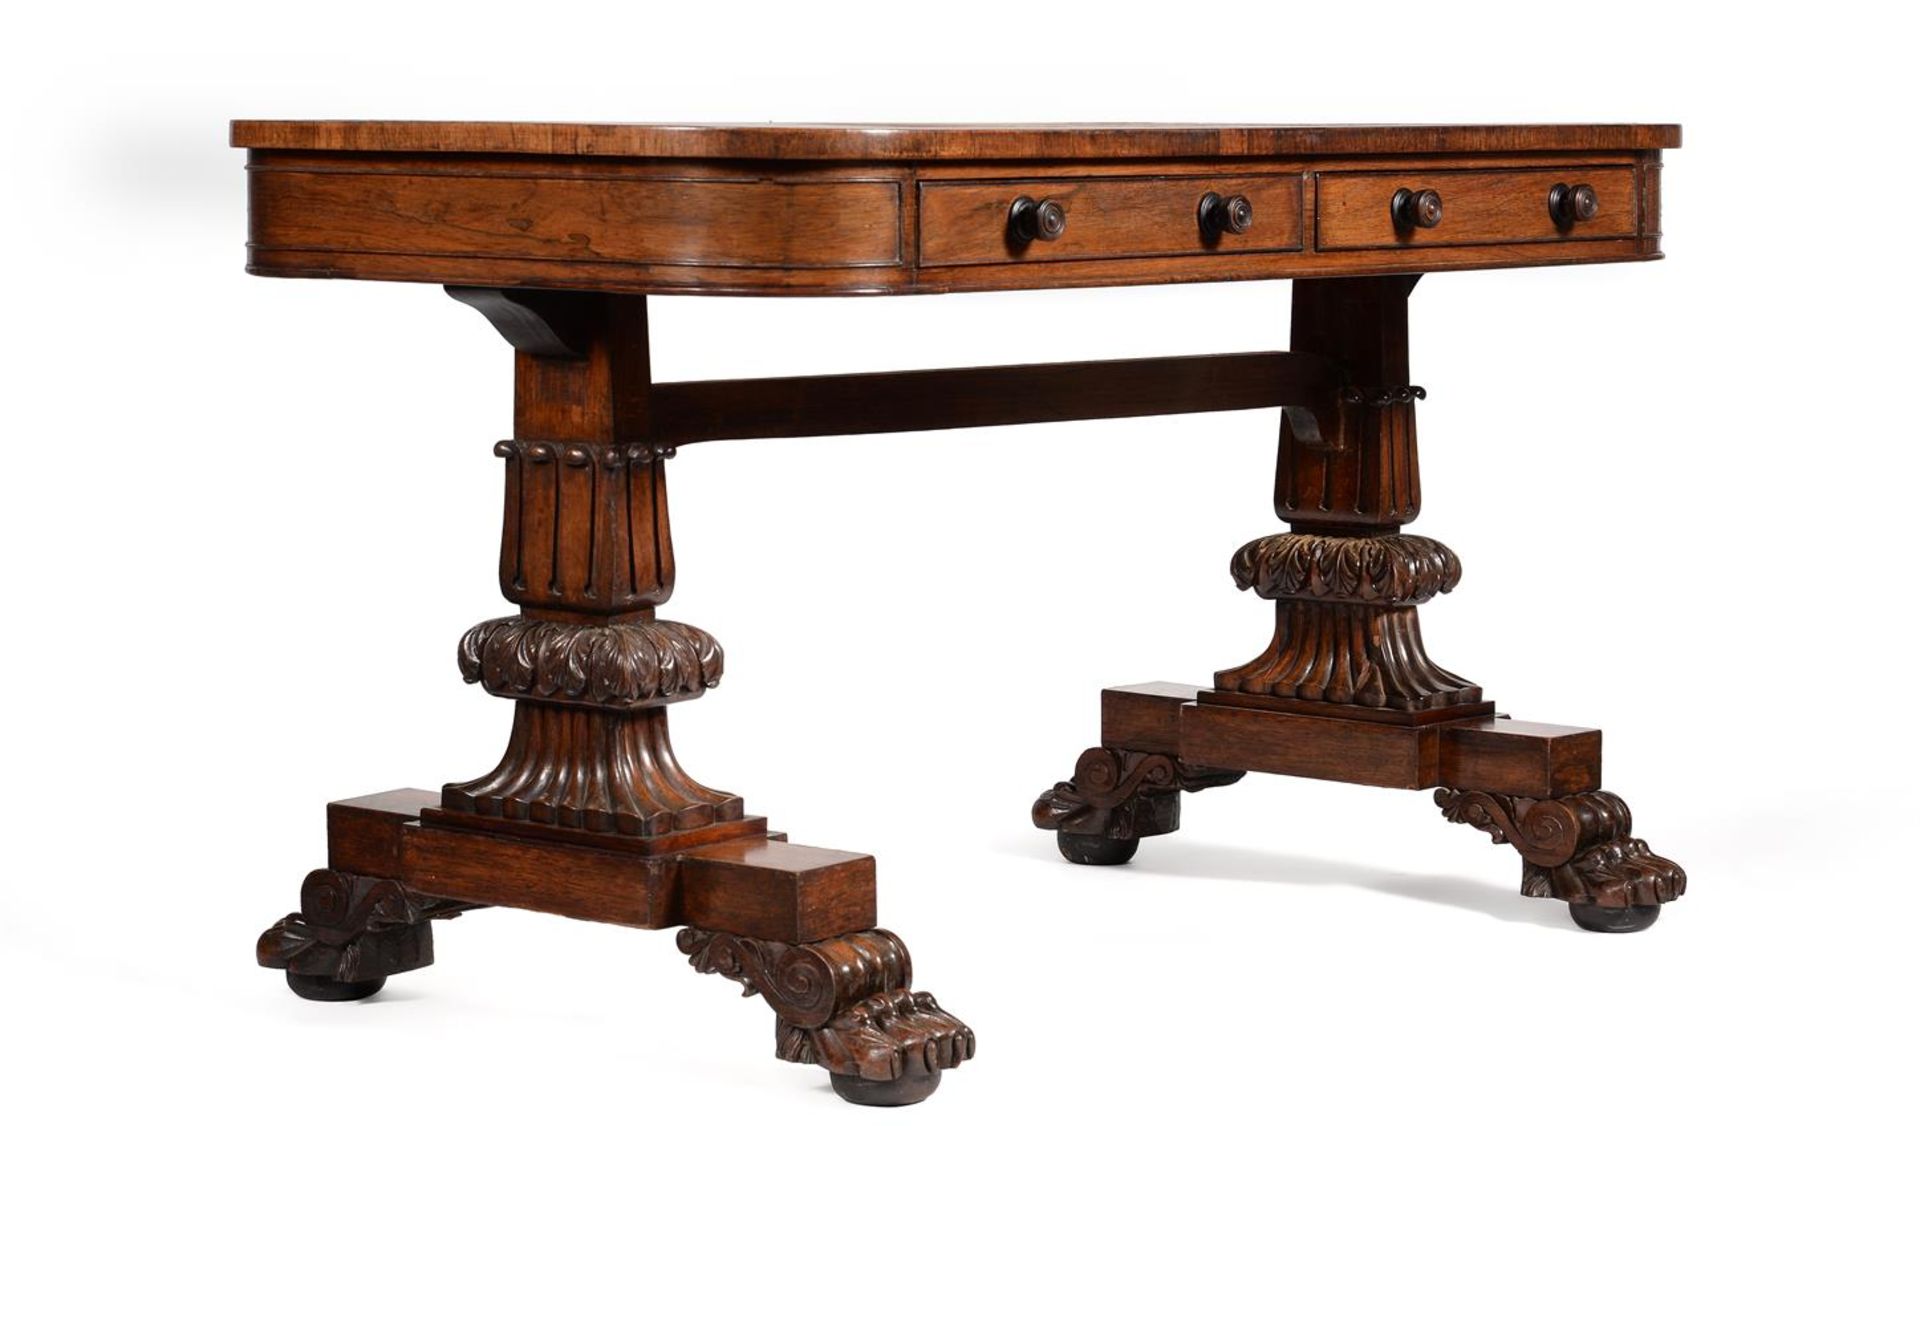 Y A GEORGE IV ROSEWOOD LIBRARY TABLE, IN THE MANNER OF MACK, WILLIAM & GIBTON, CIRCA 1825 - Image 4 of 6